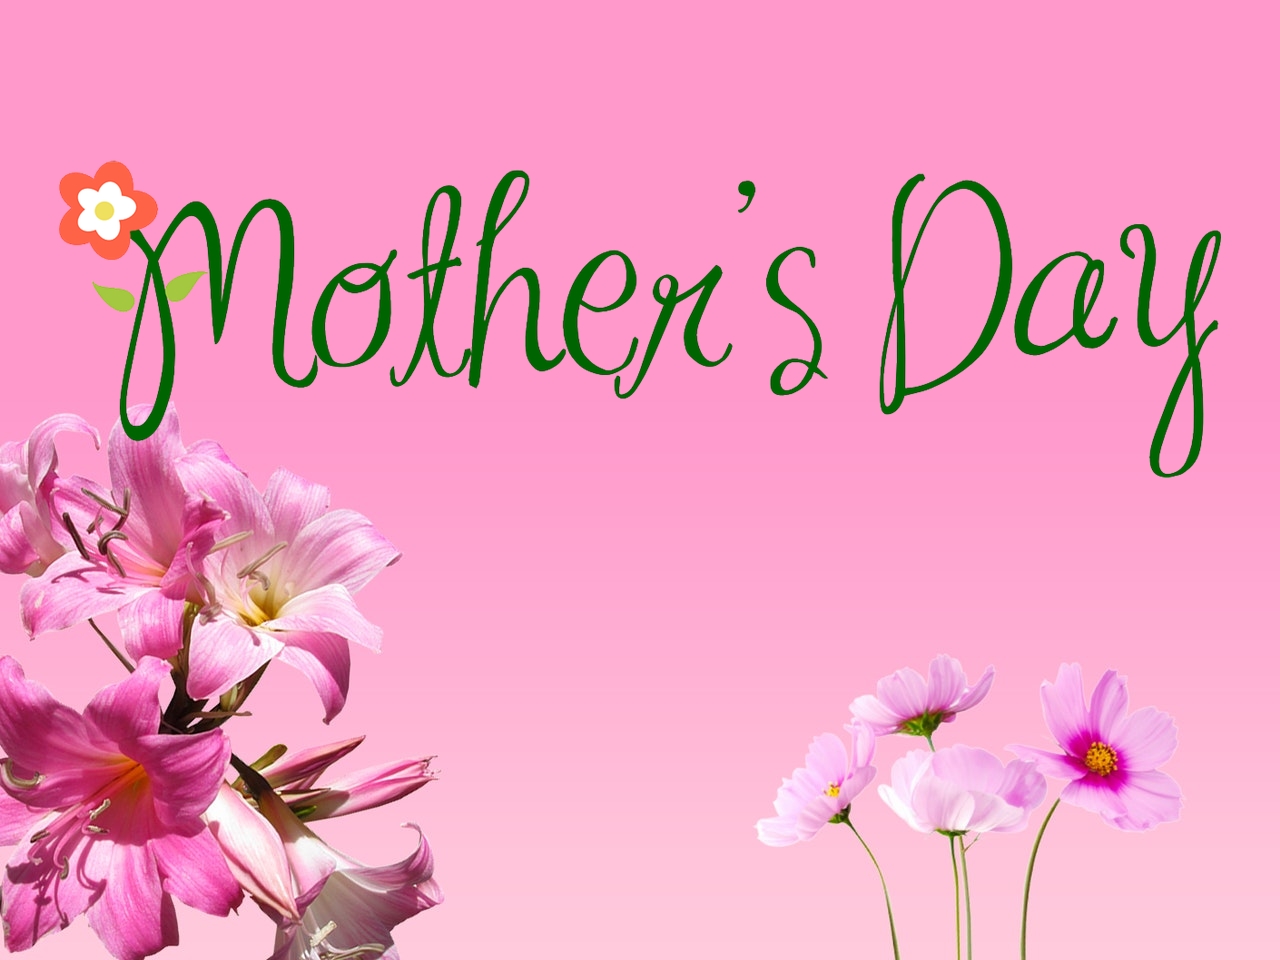 Mother’s Day Image